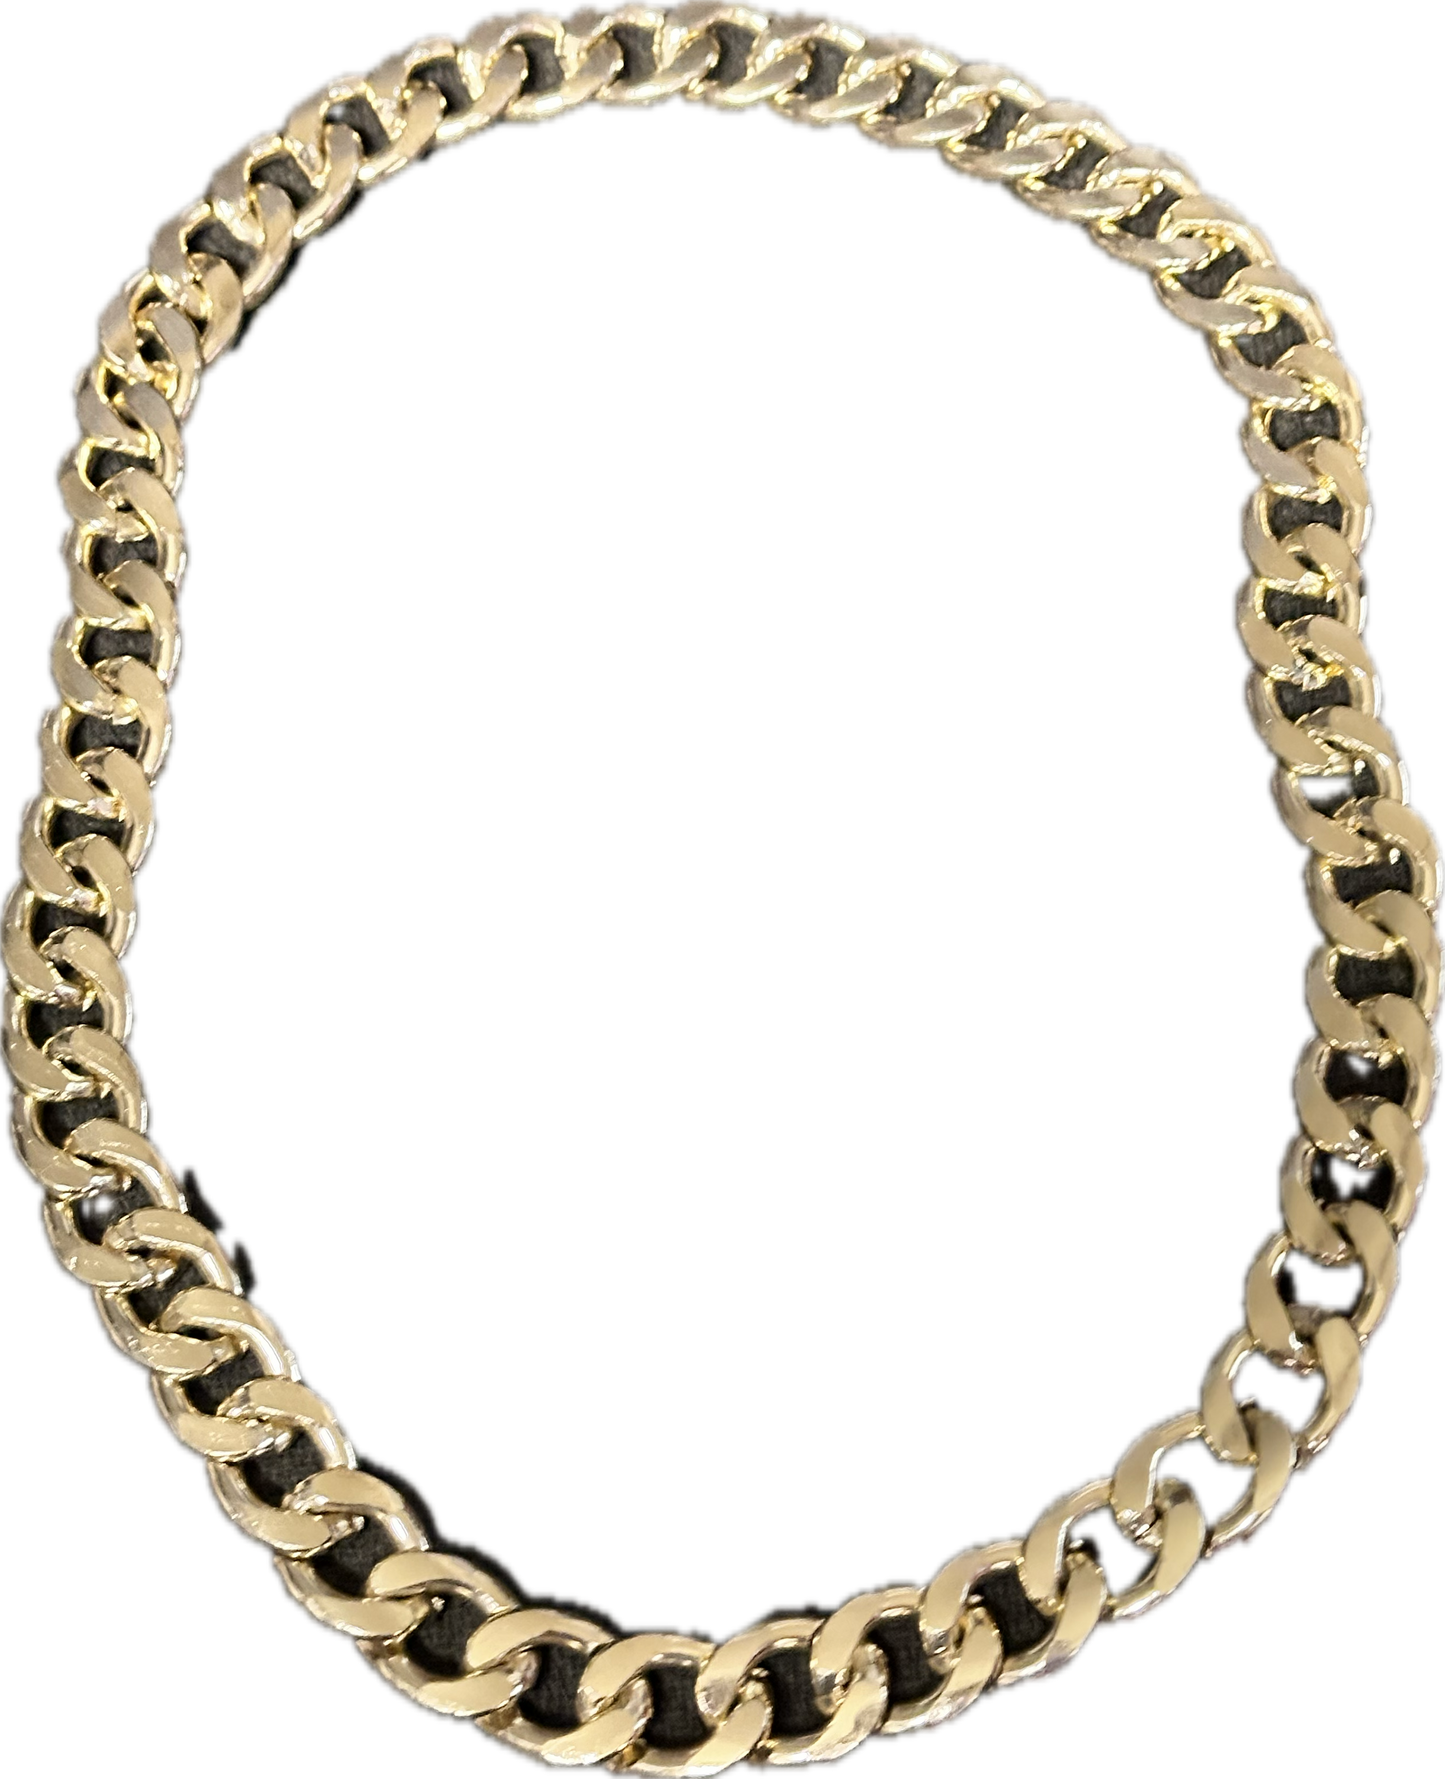 30 Rock: Tracy’s Thick Gold Cuban Chain Link Necklace Prop